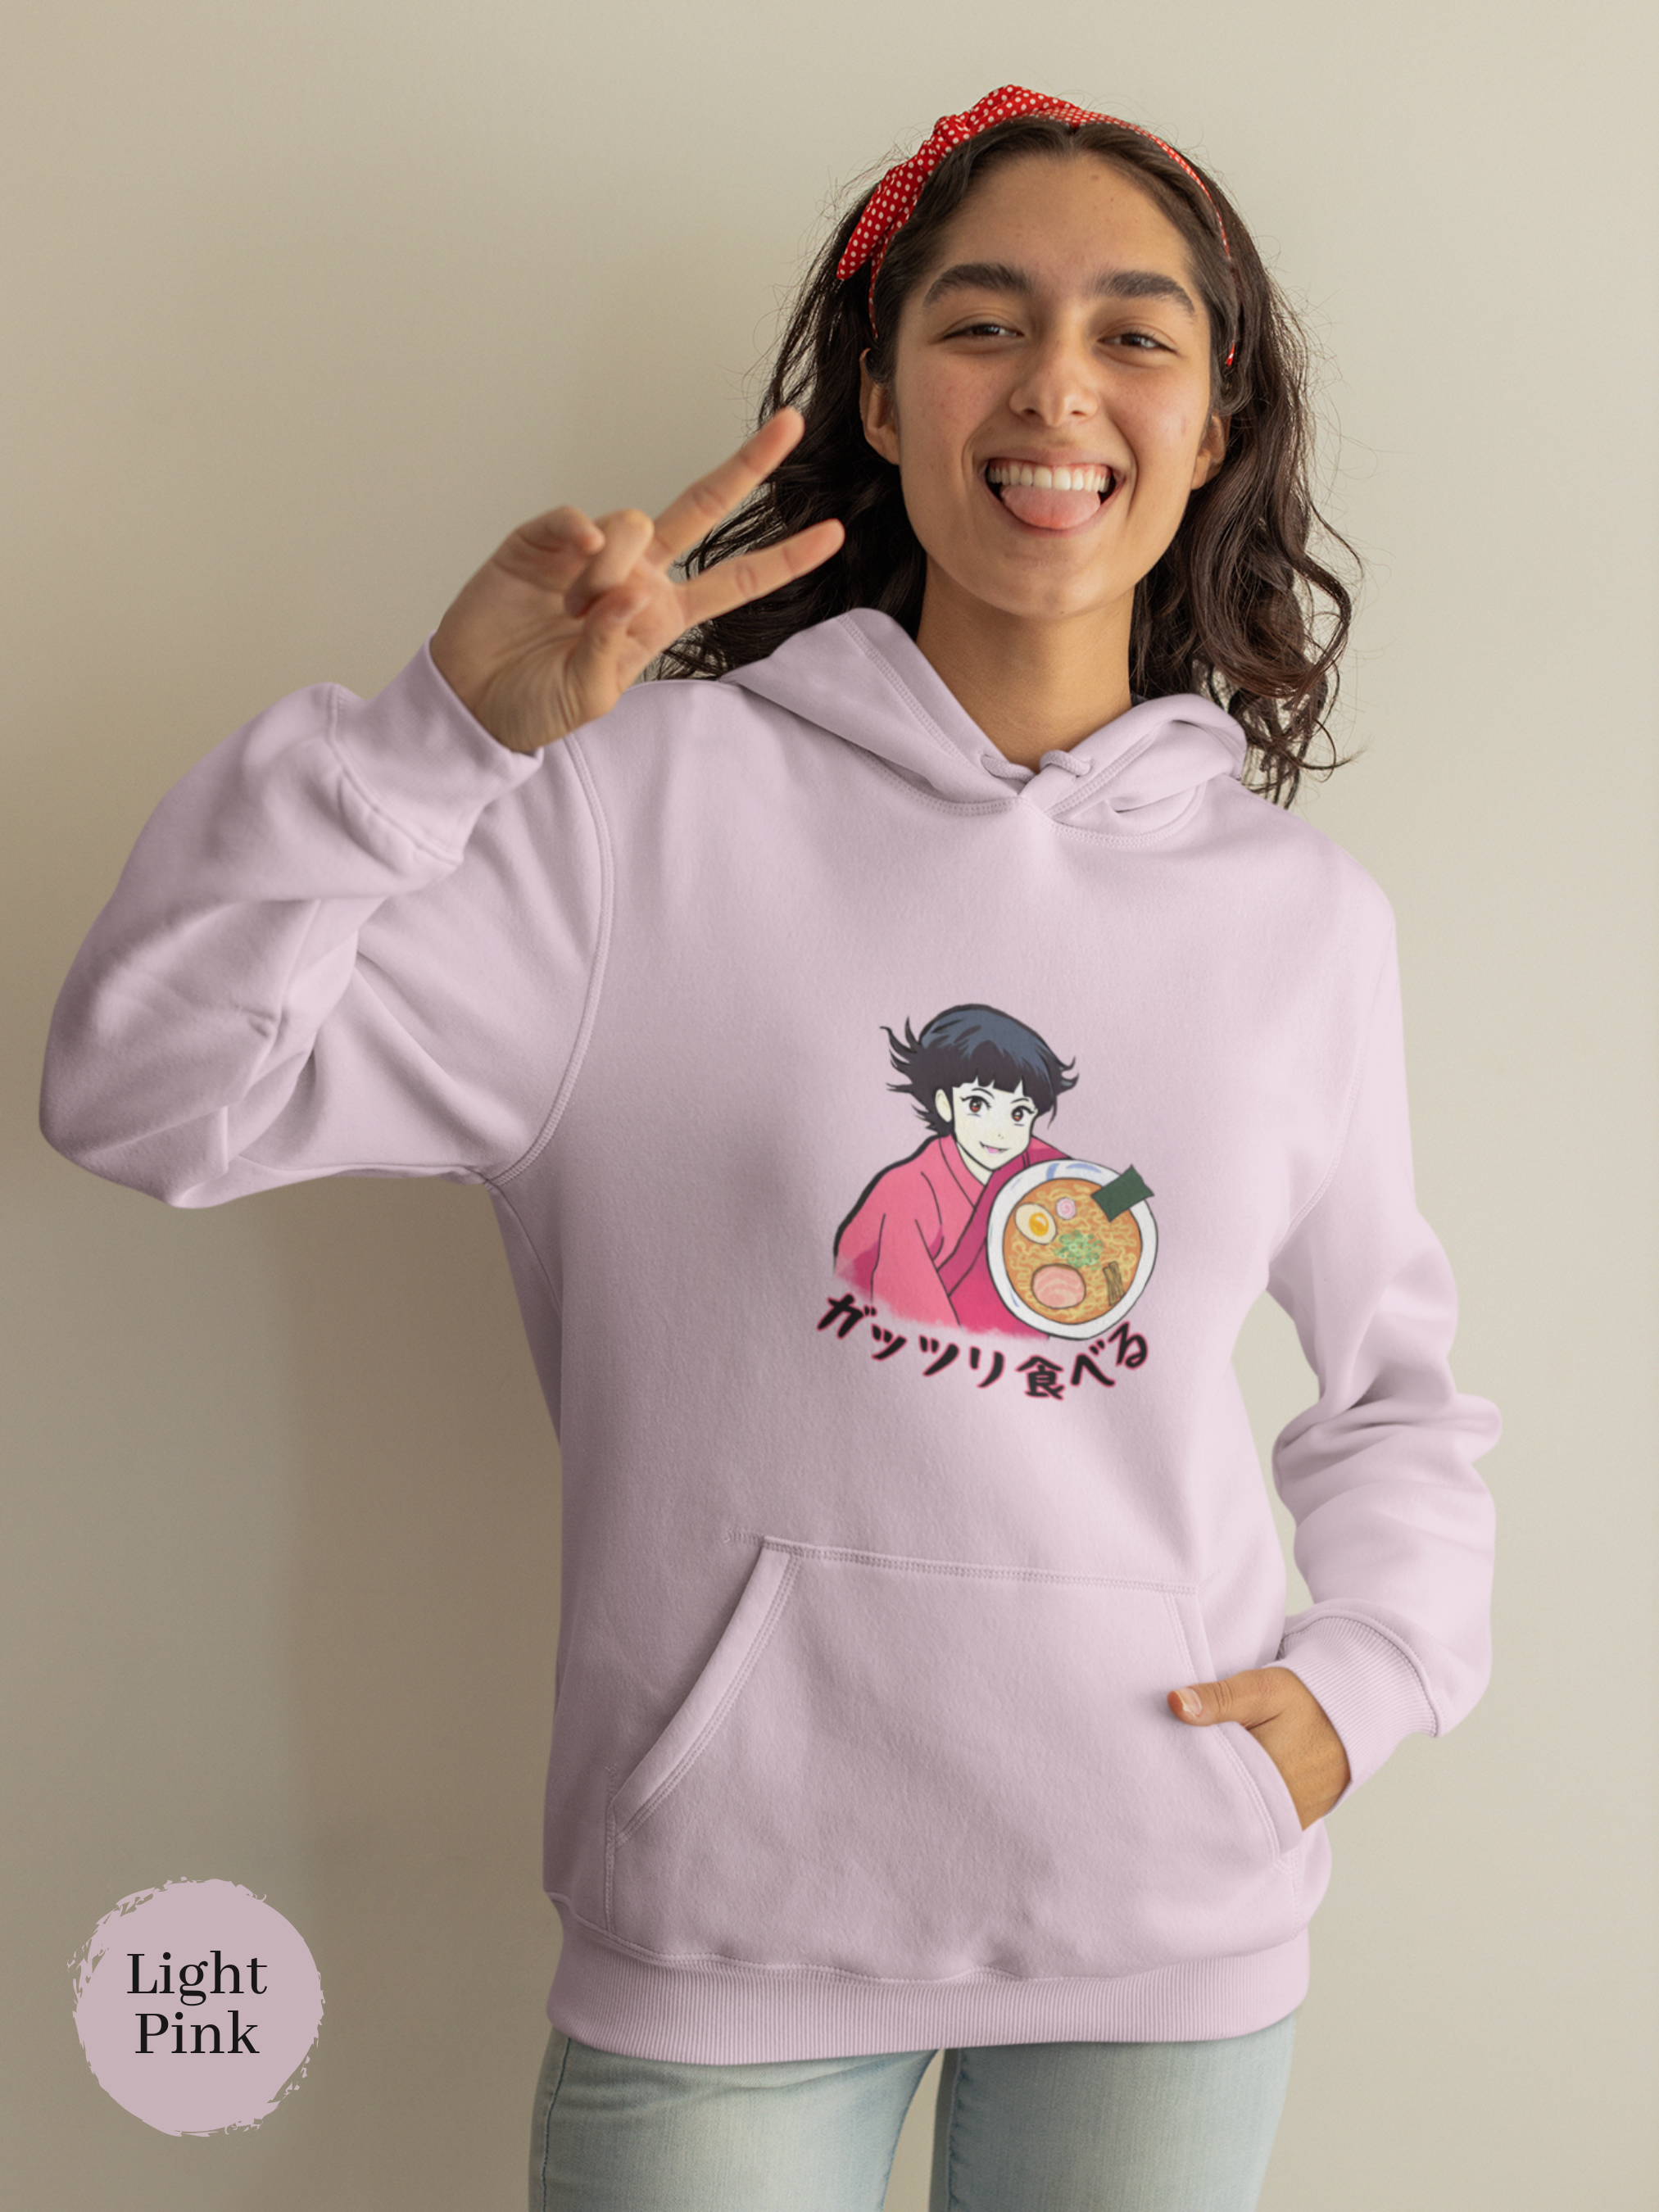 Ramen Hoodie: Anime Kimono Girl Edition - A Foodie Hoodie for Fans of Ramen Art and Asian Cuisine